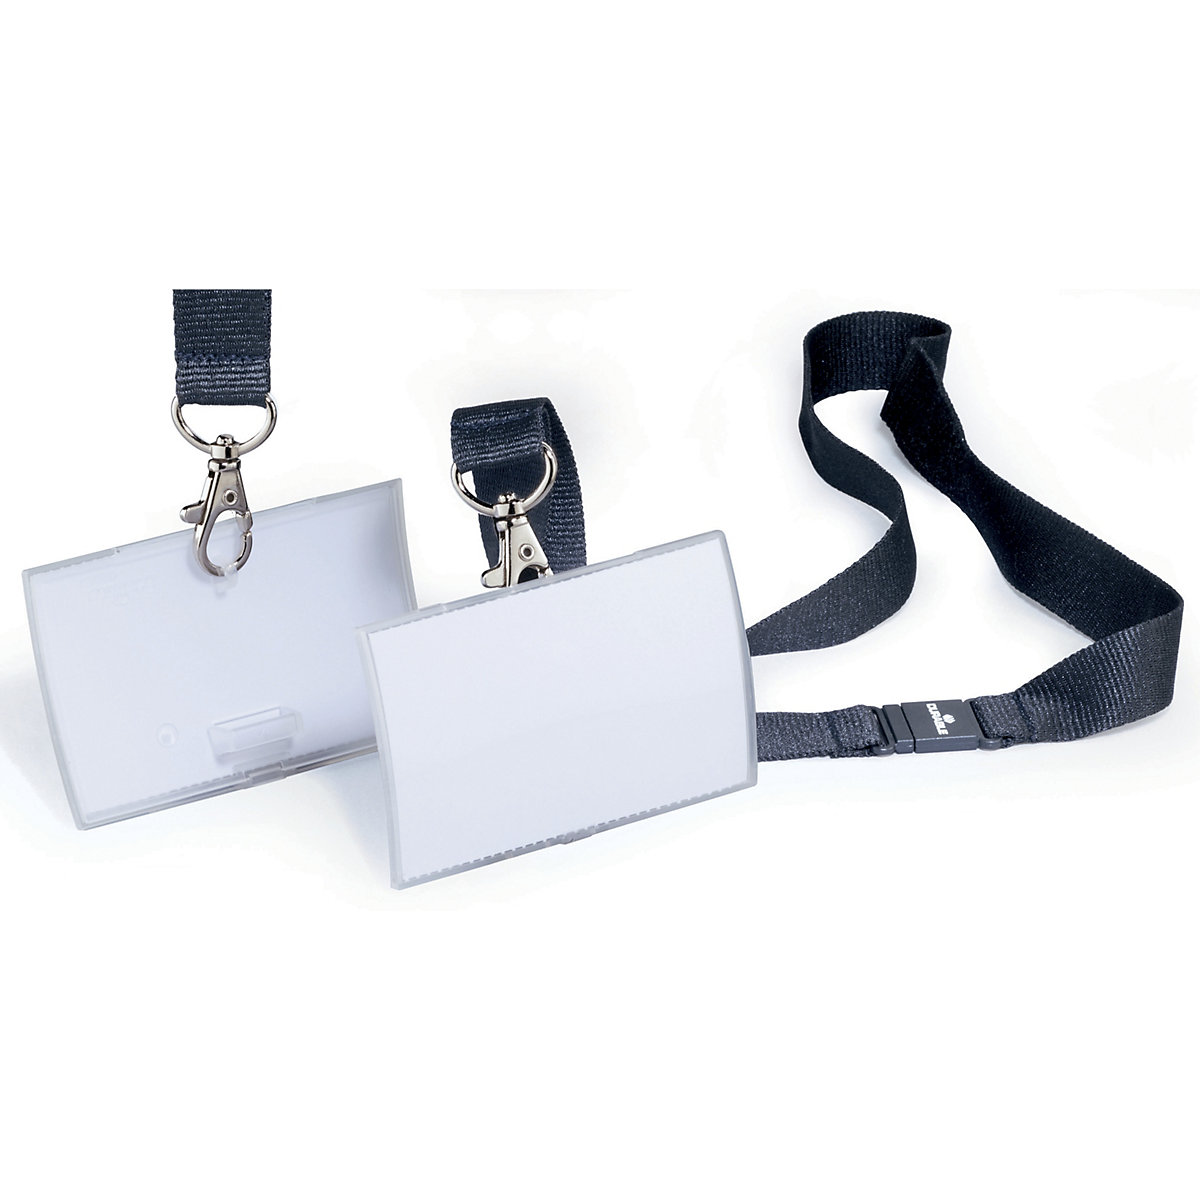 CLICK FOLD with fabric strap – DURABLE